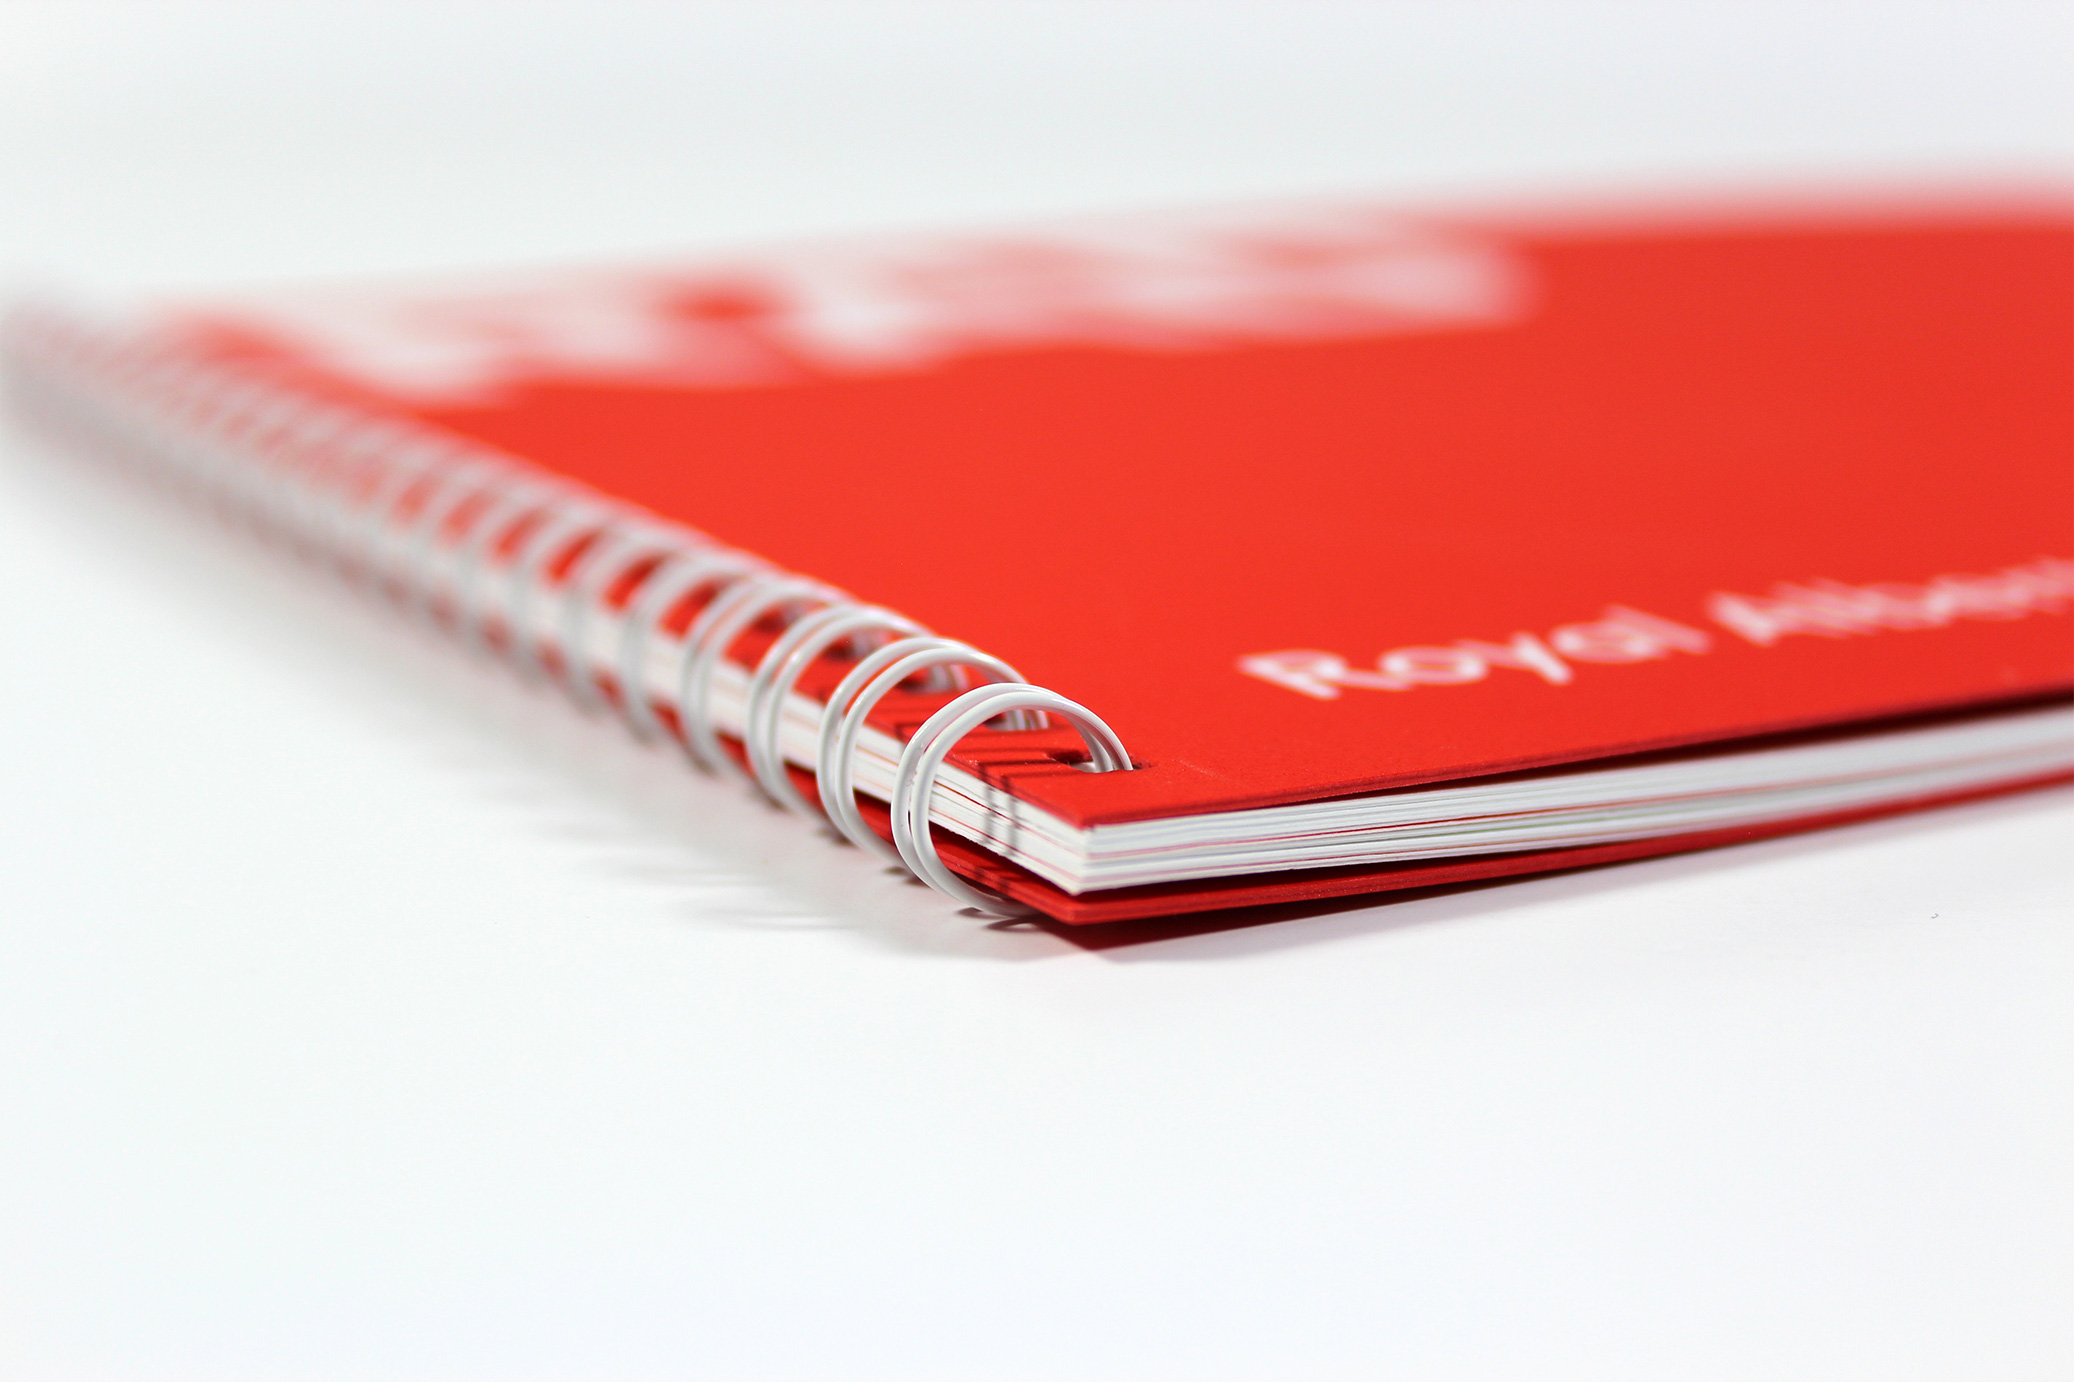 Printed Wiro-bound corporate promotional brochure for RAD - close-up showing the binding and red card front cover